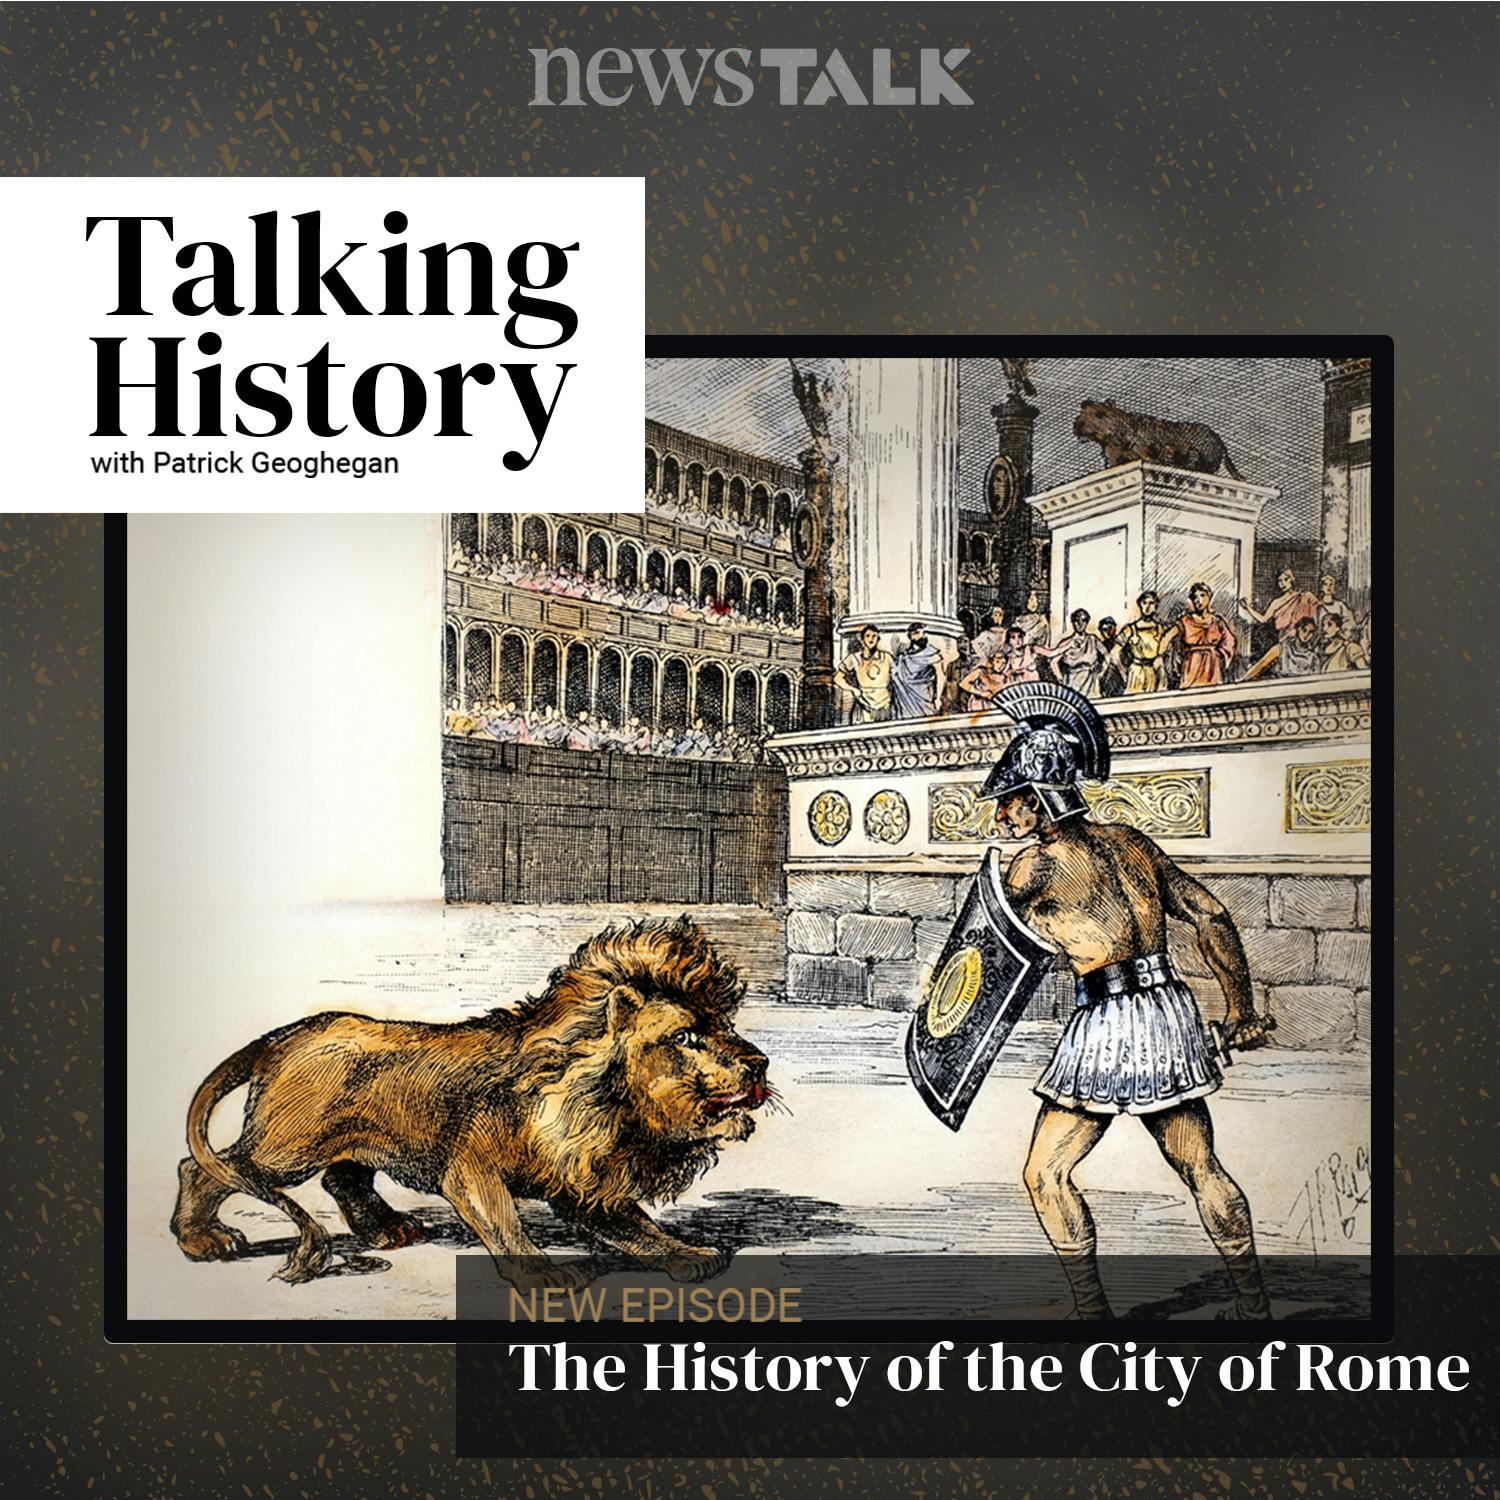 The History of the City of Rome